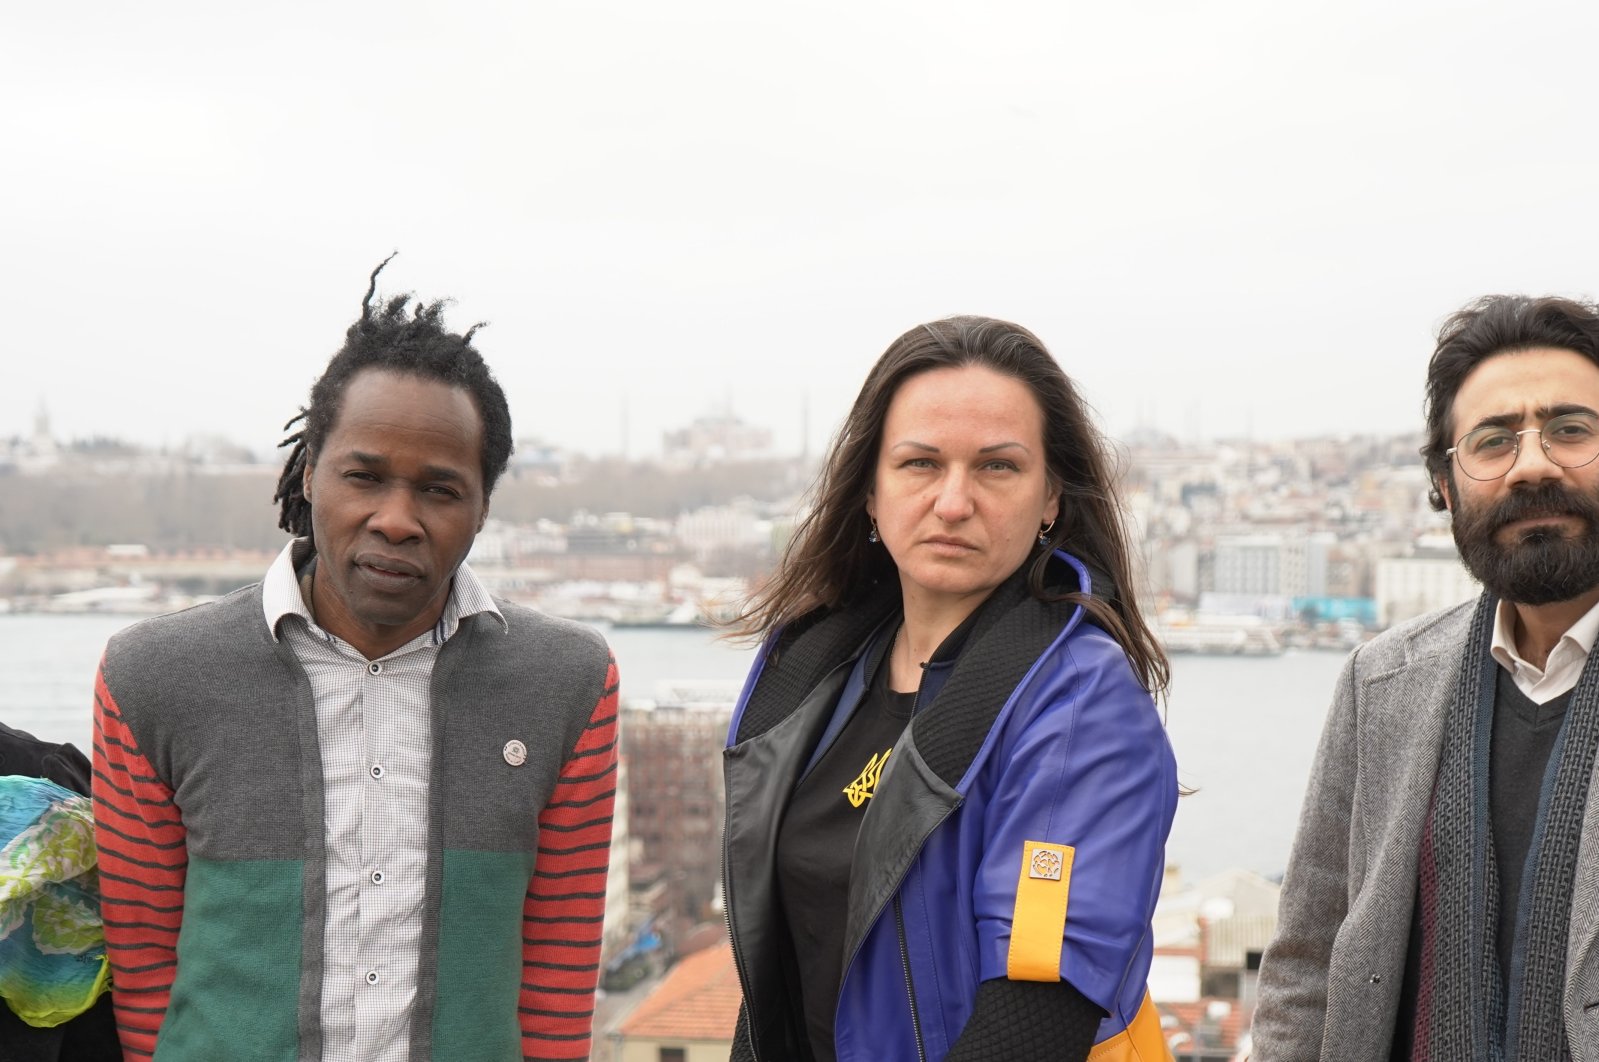 From left to right, artists Saghar Daeri, Enzo Ikah, Marina Nazarova and Ali Bonyadi are participating in “Dialogue Project – Istanbul” by Pera Museum. (Photo Courtesy of Pera Museum)